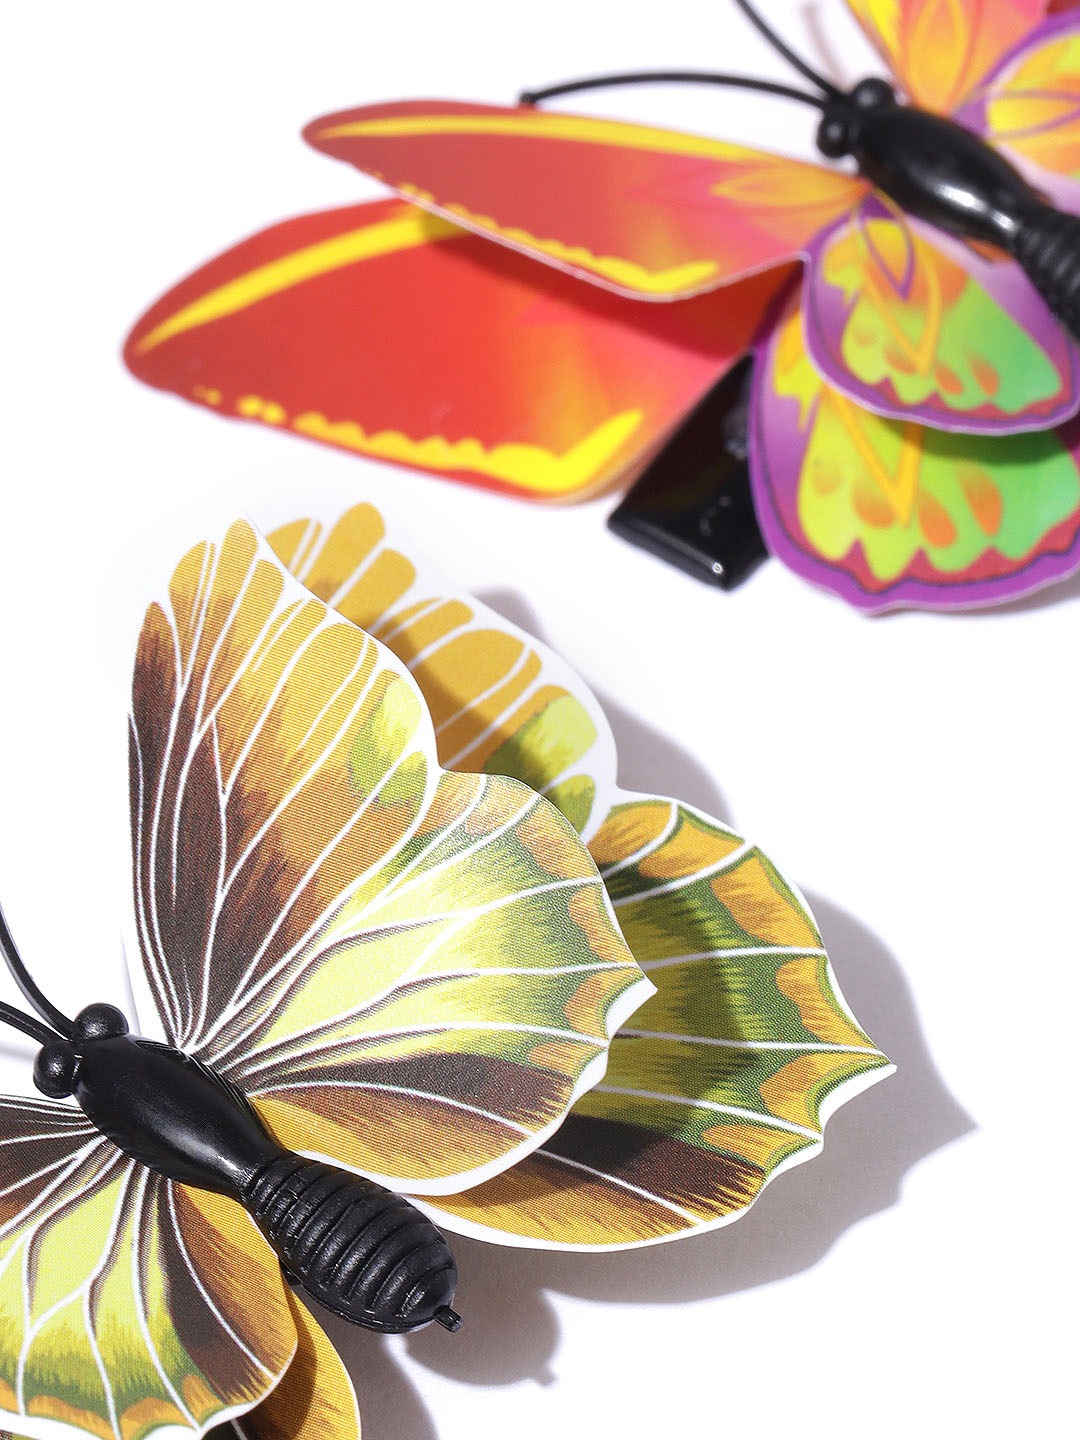 Blueberry KIDS set of 2 multi color butterfly alligator hair clips